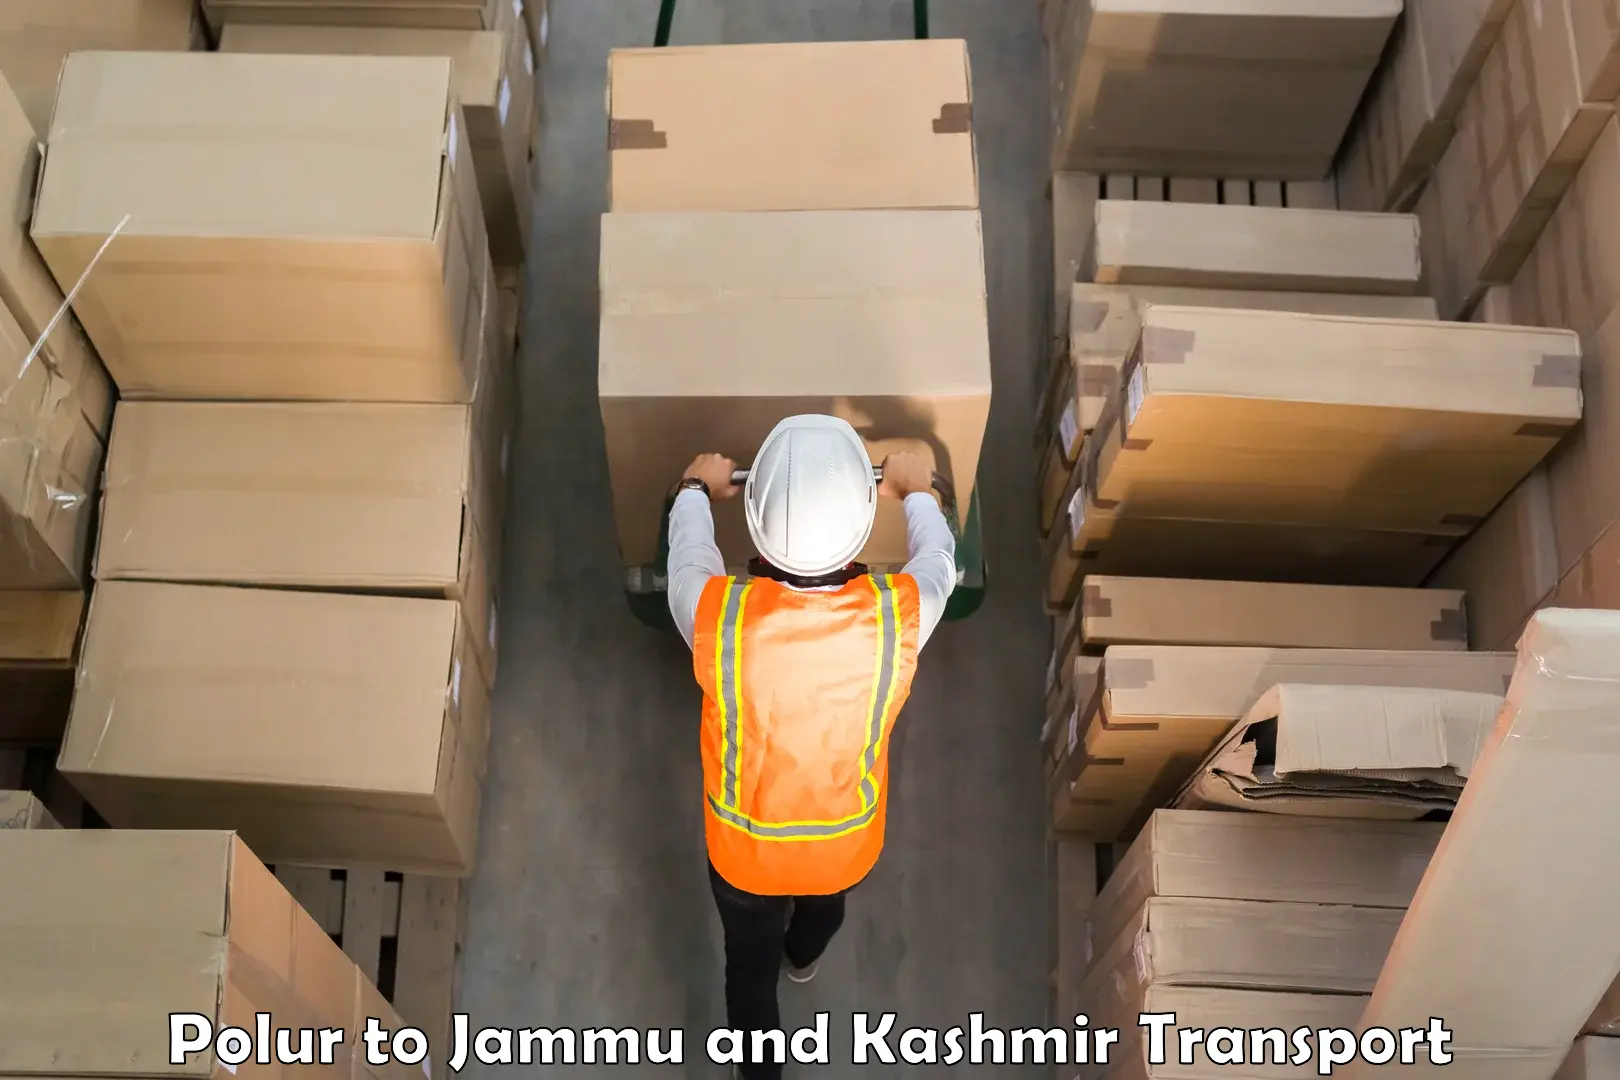 Land transport services in Polur to Jammu and Kashmir